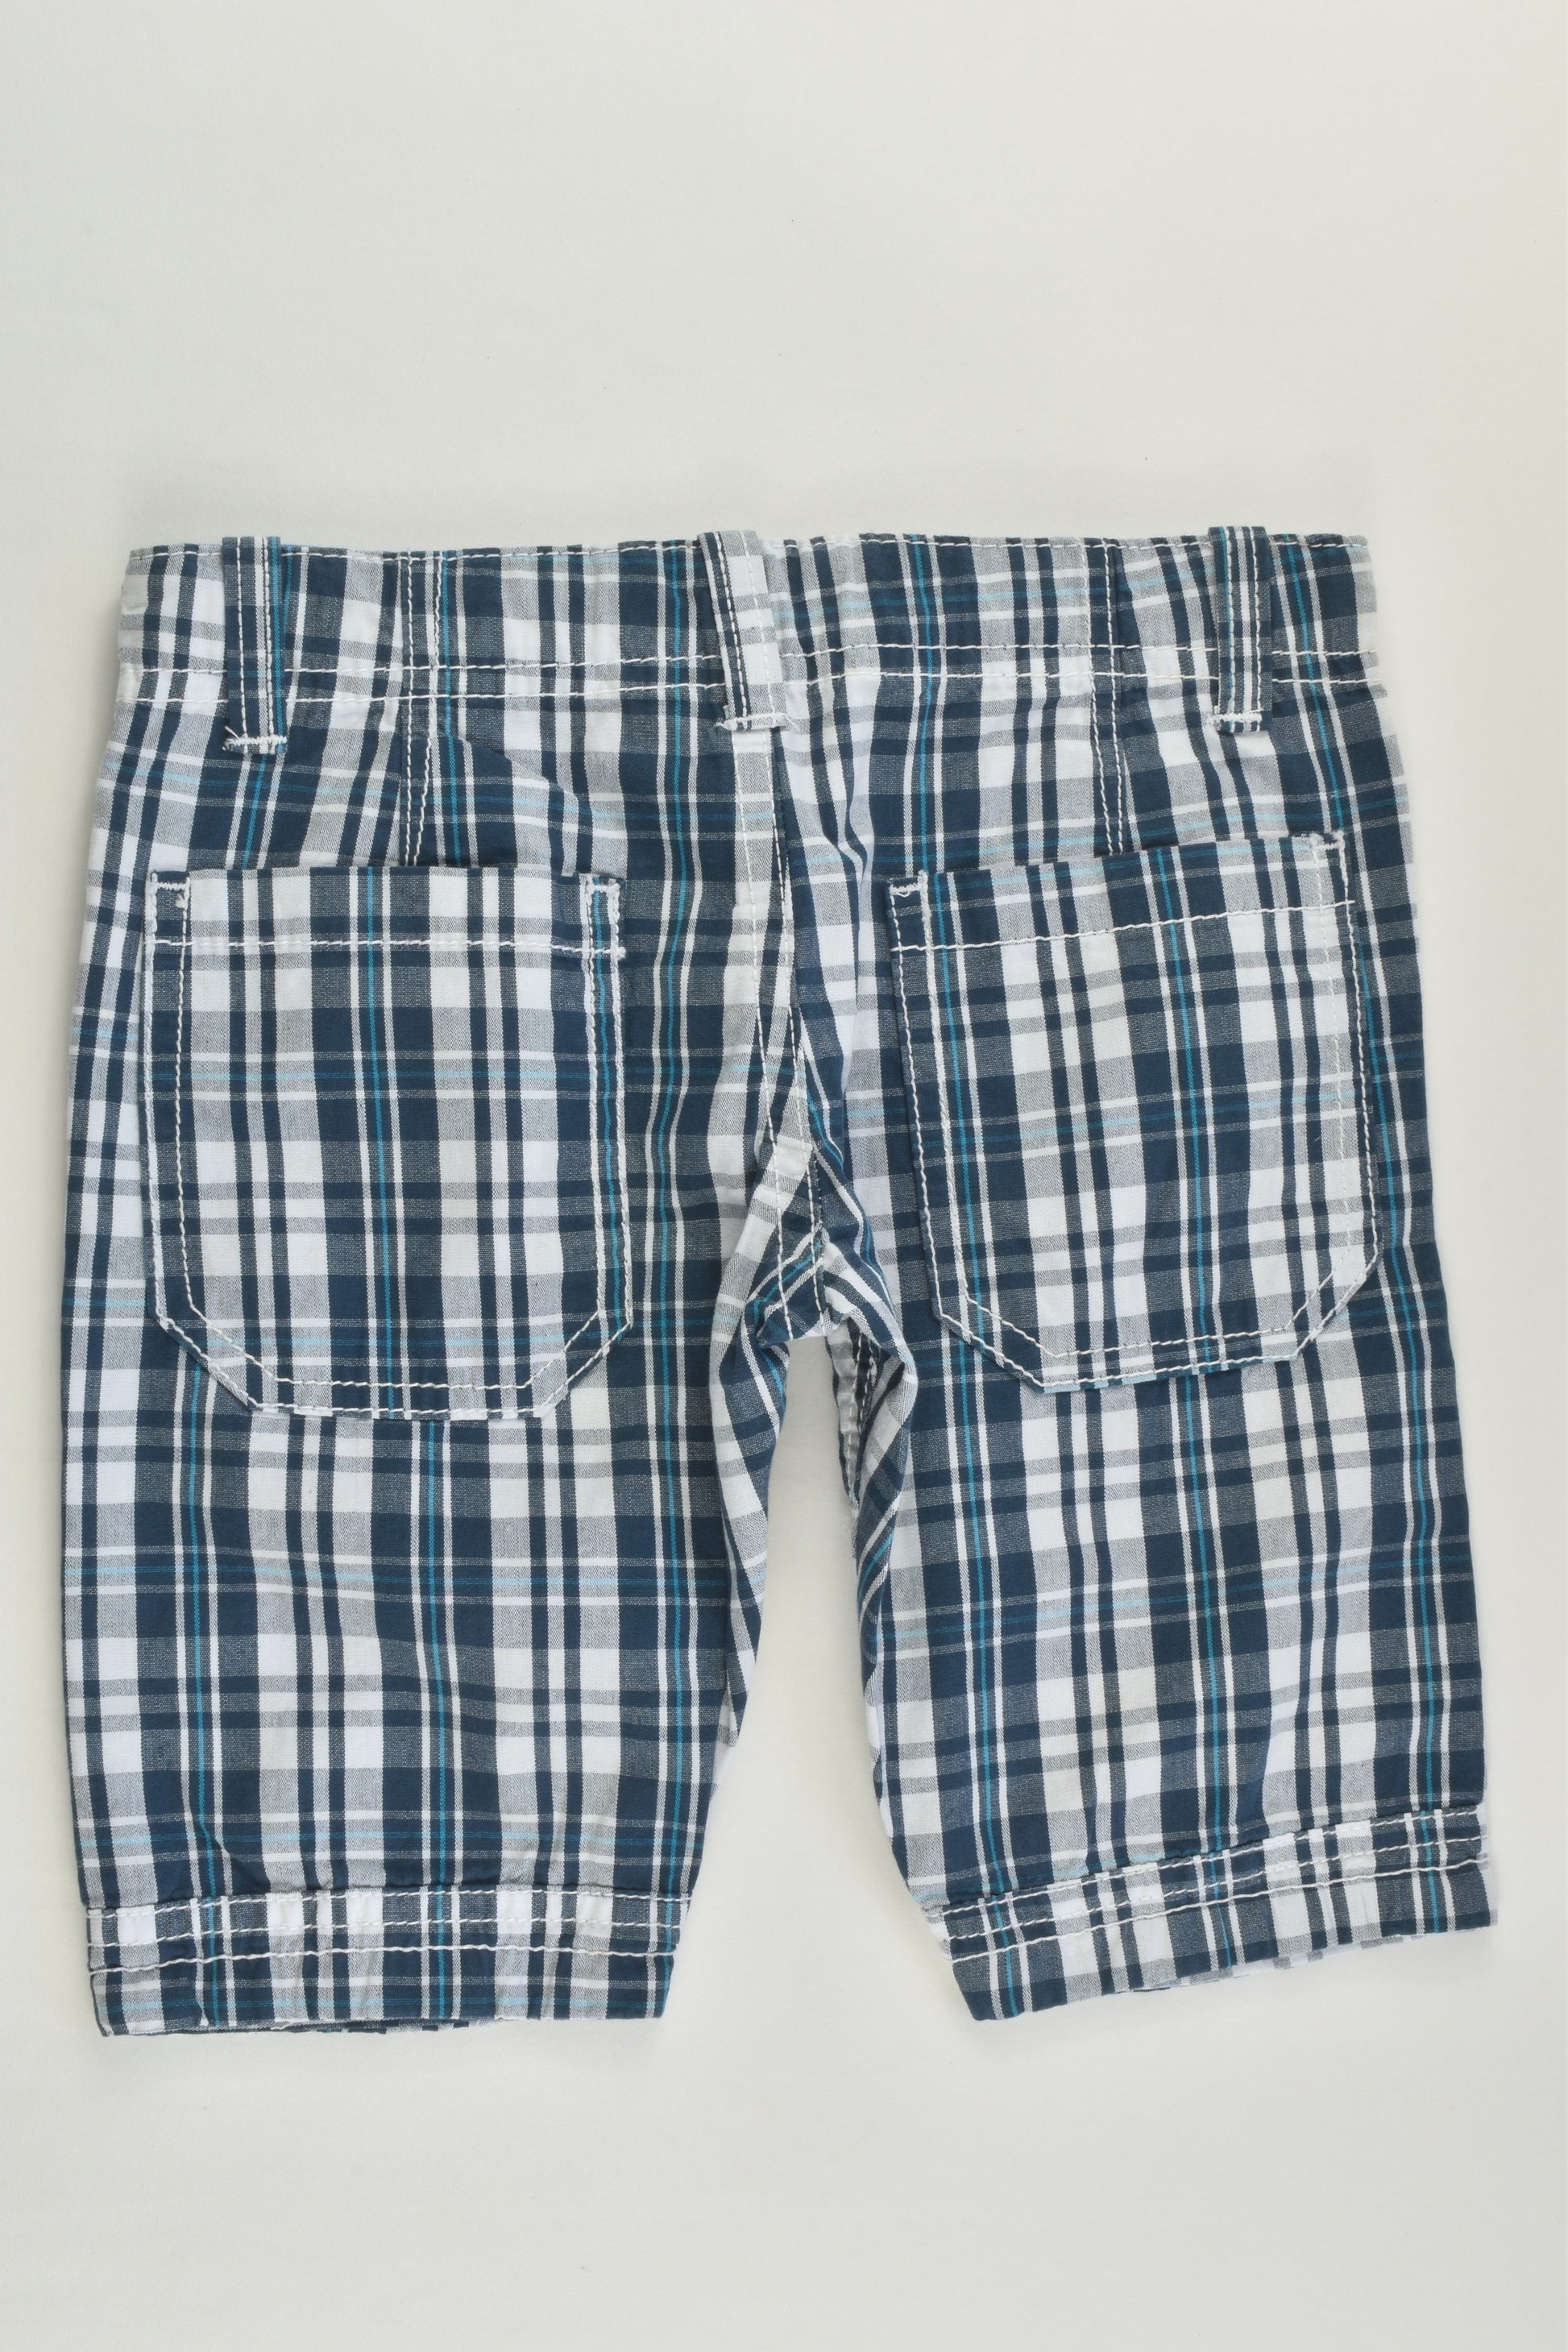 NEW Silversun Size 2-3 (92 cm) Checked Shorts